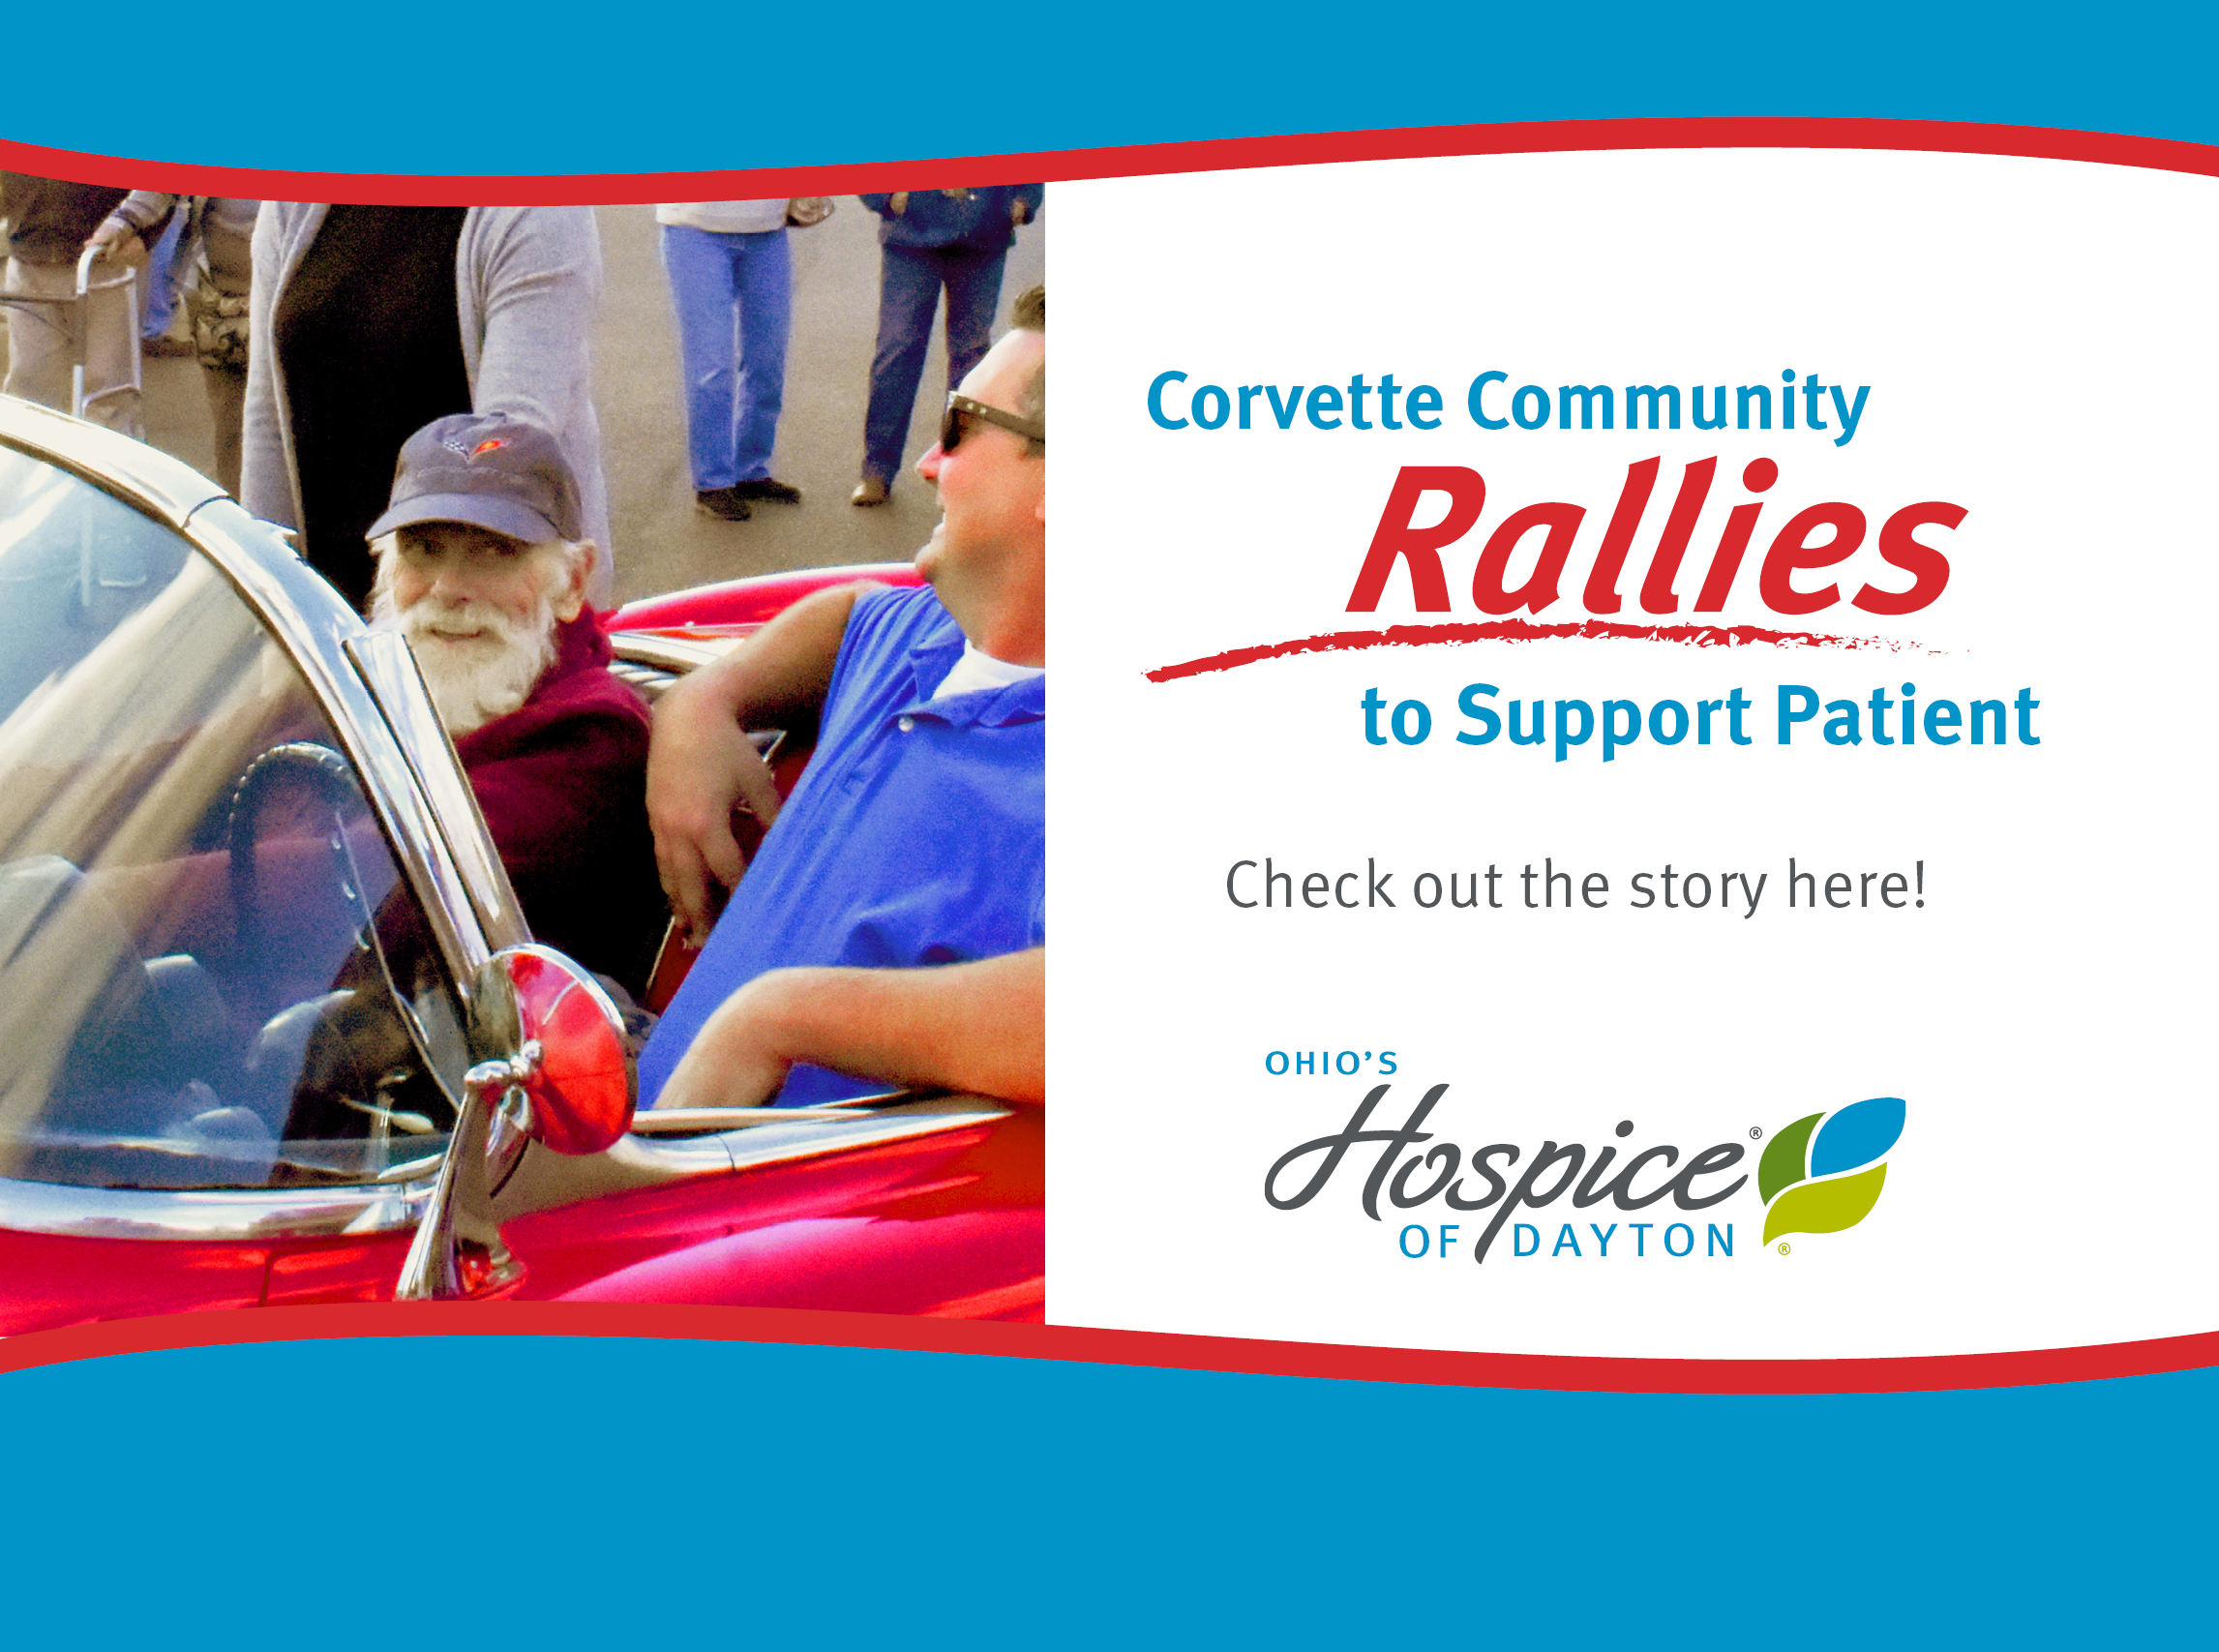 Corvette Community Rallies to Support Patient: Check out the story here!